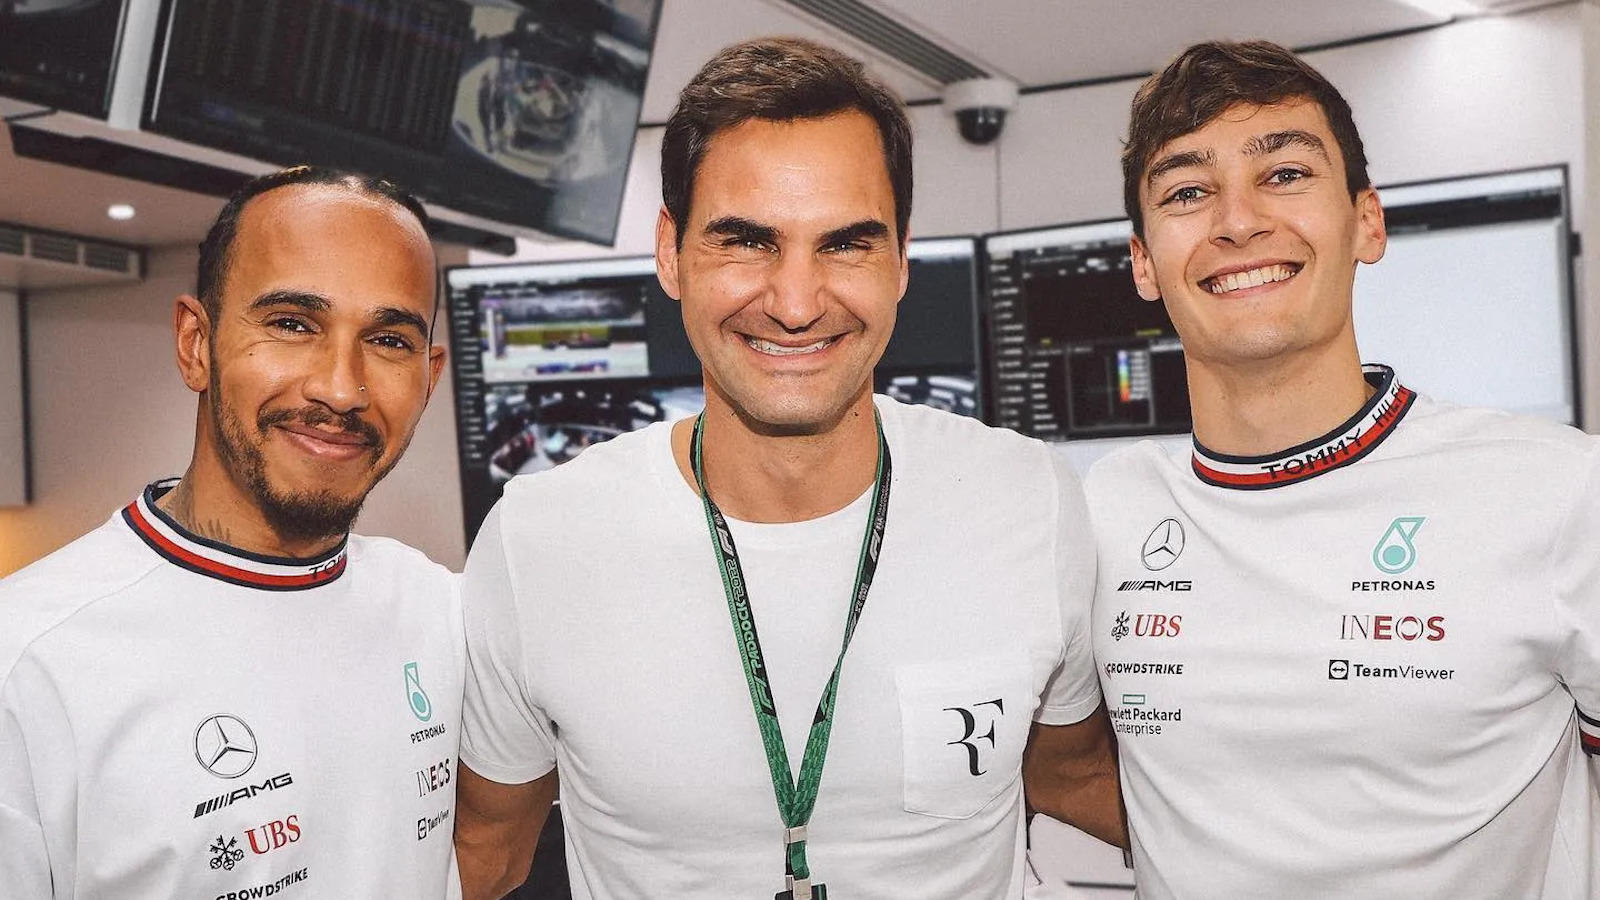 Roger Federer Spotted Wearing Rolex's Hottest New Watch At Spanish Grand Prix